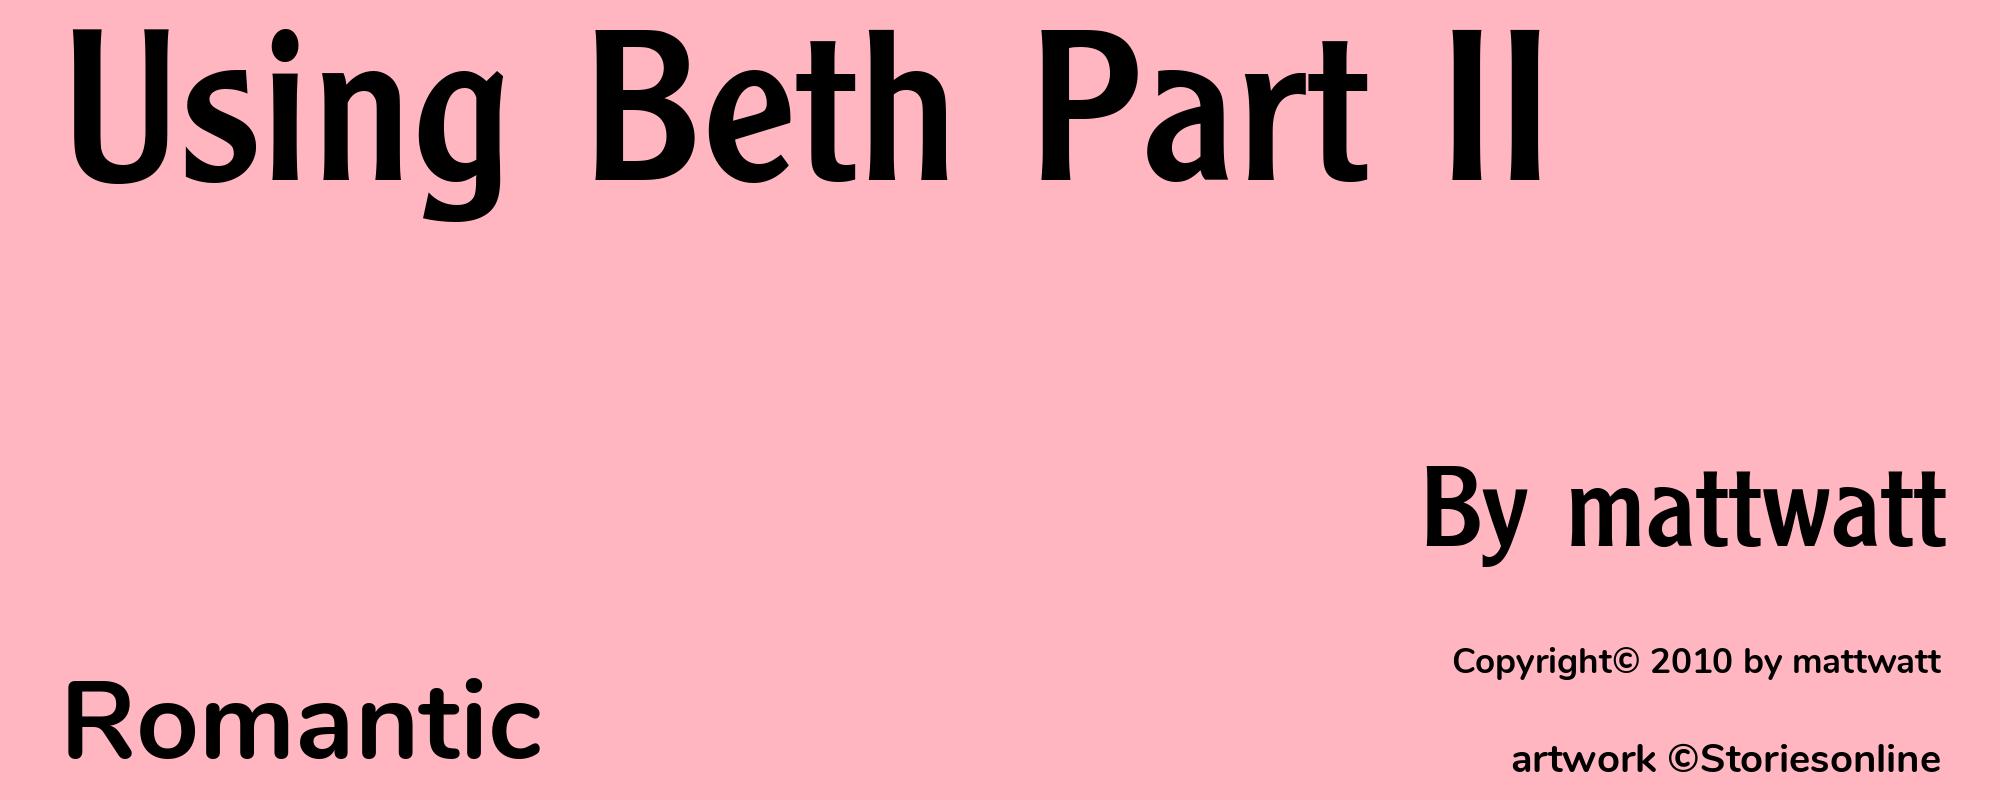 Using Beth Part II - Cover